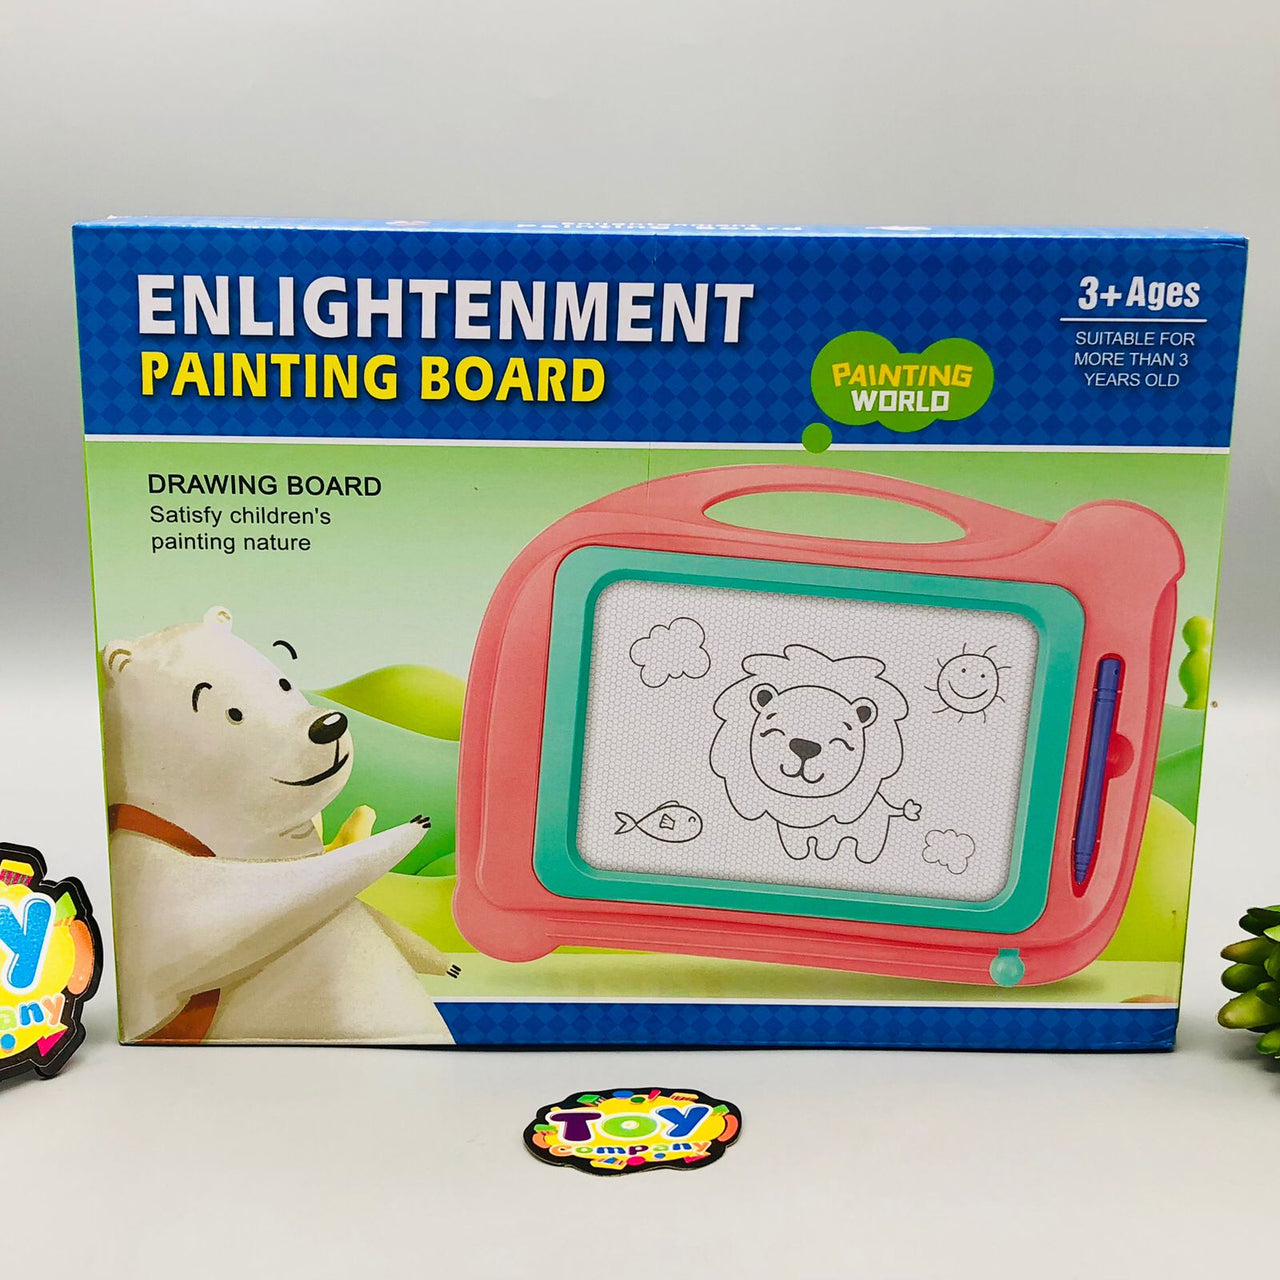 Enlightenment Painting Board